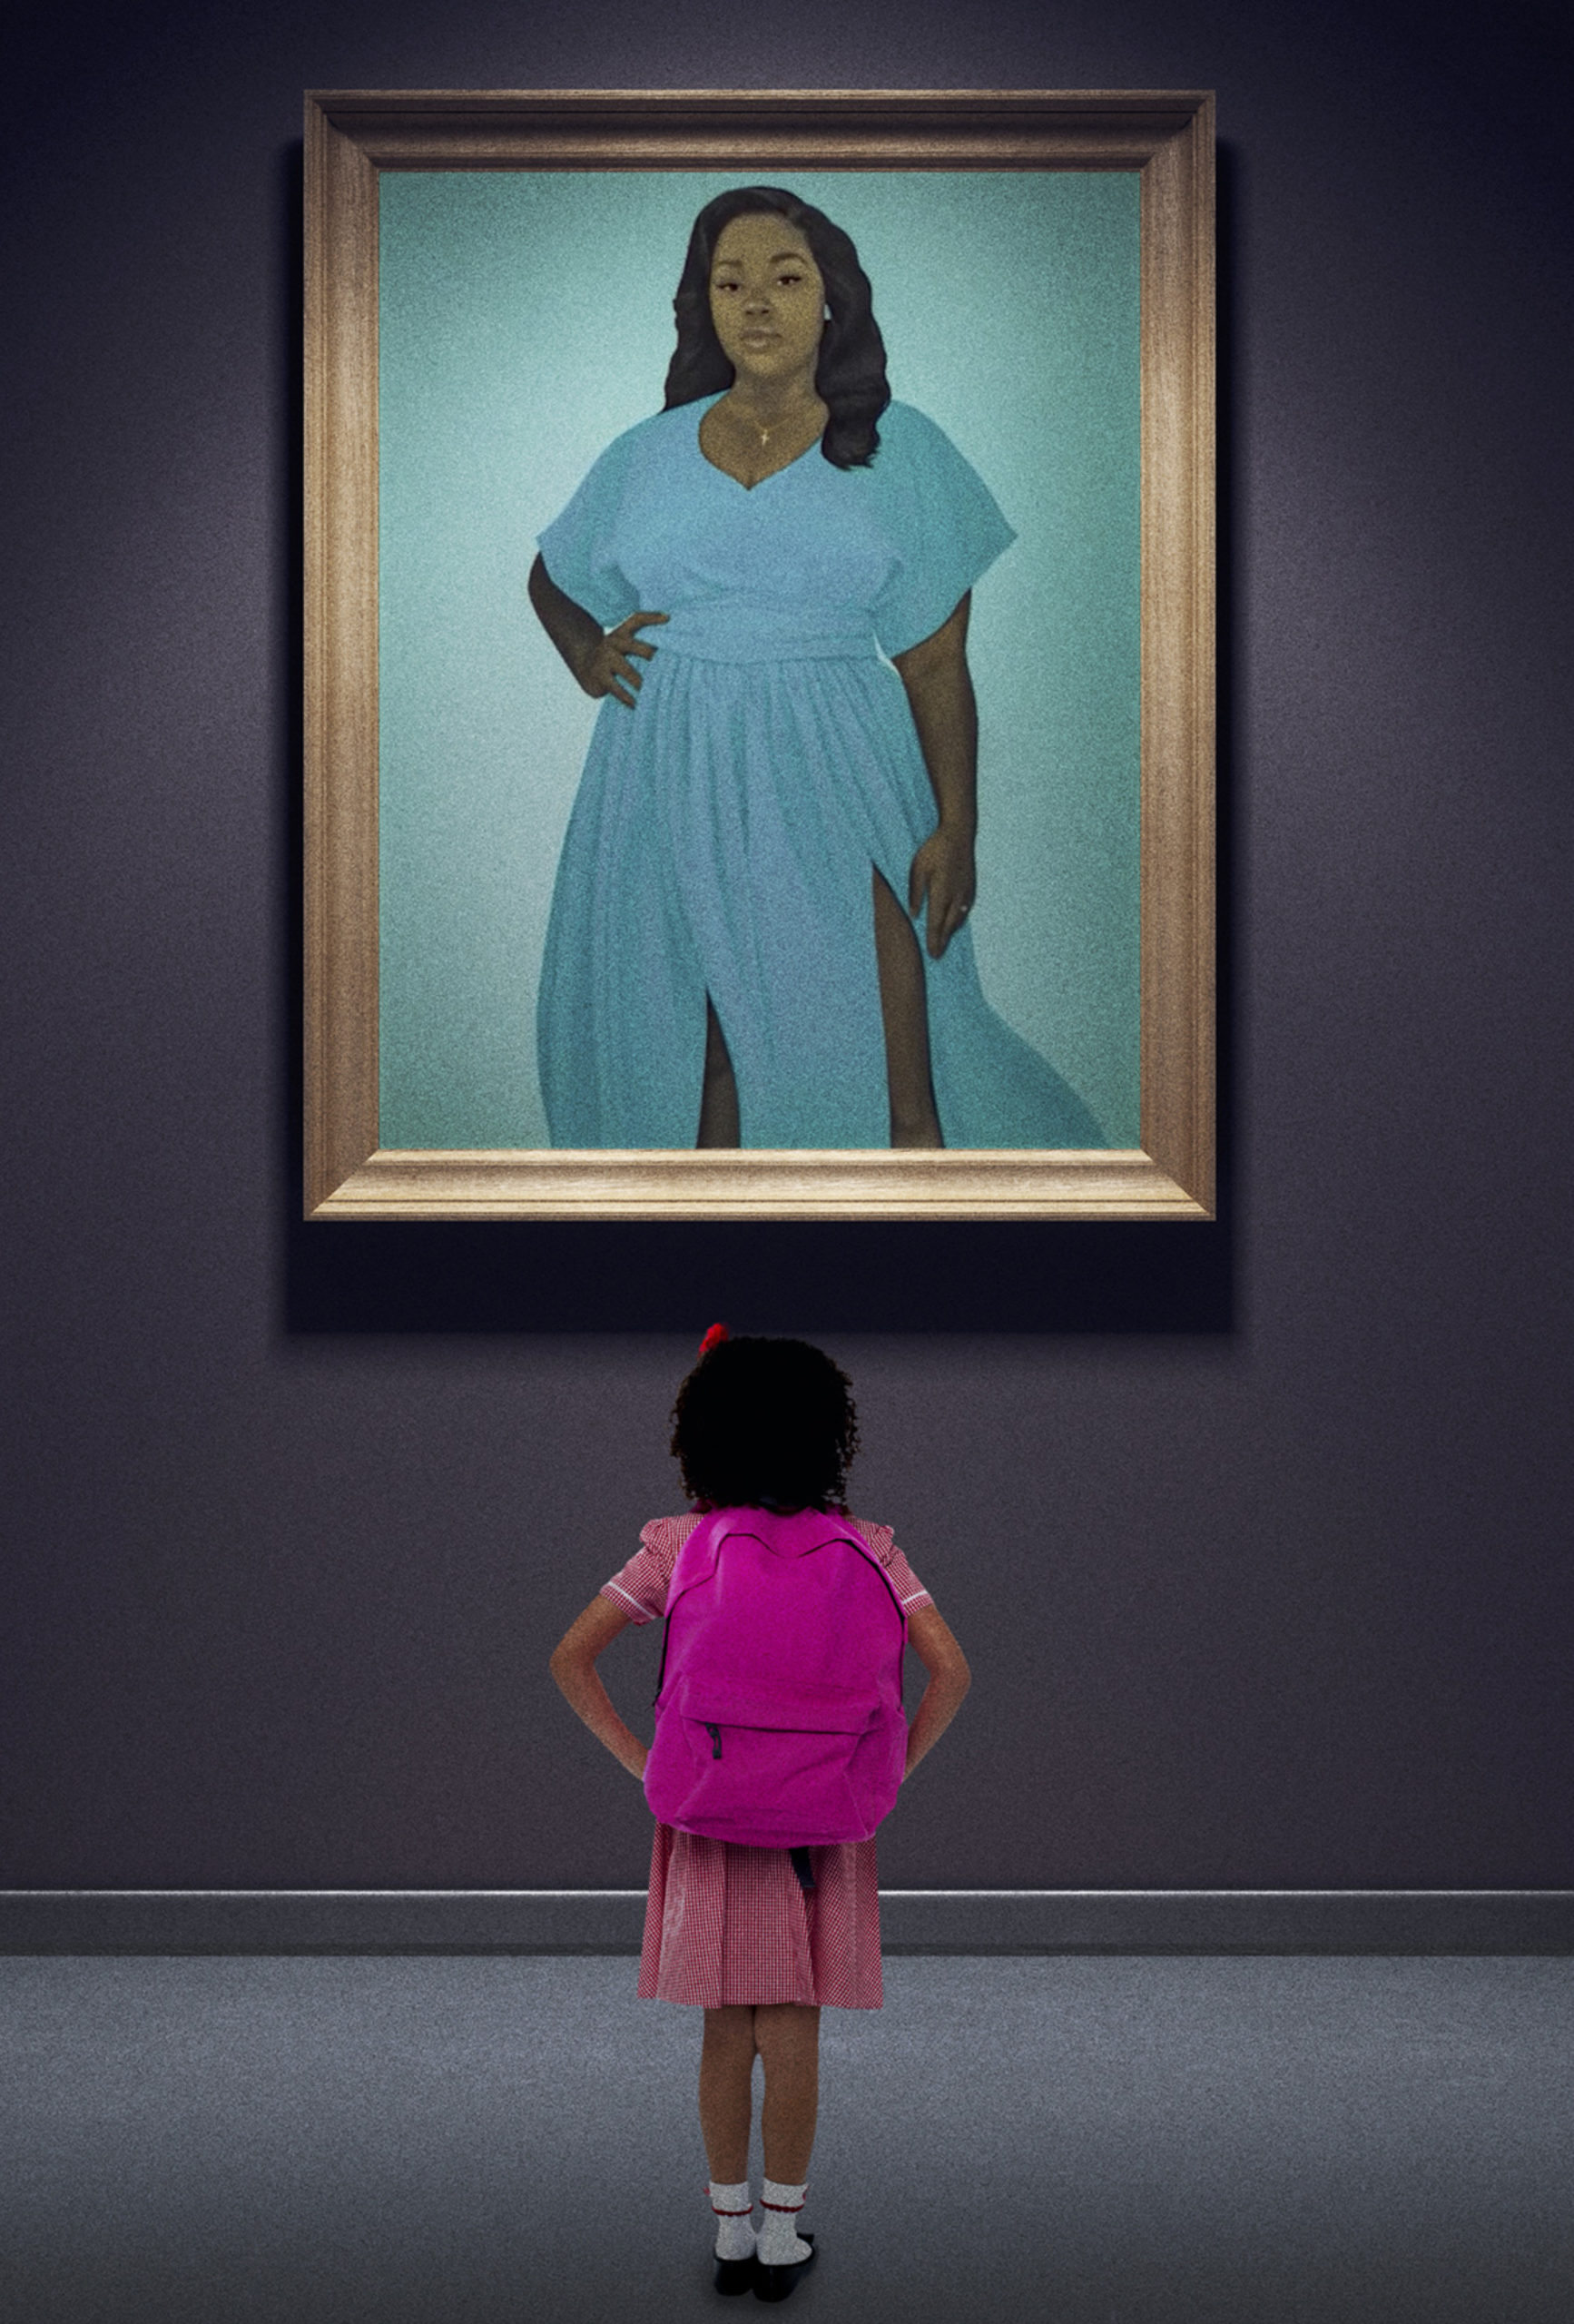 A film still from Dawn Porter's film “Bree Wayy”
featuring a little girl looking at the portrait of Breonna Taylor painted by African American artist Amy Sherald, who is famous for painting the official portrait of Michelle Obama.